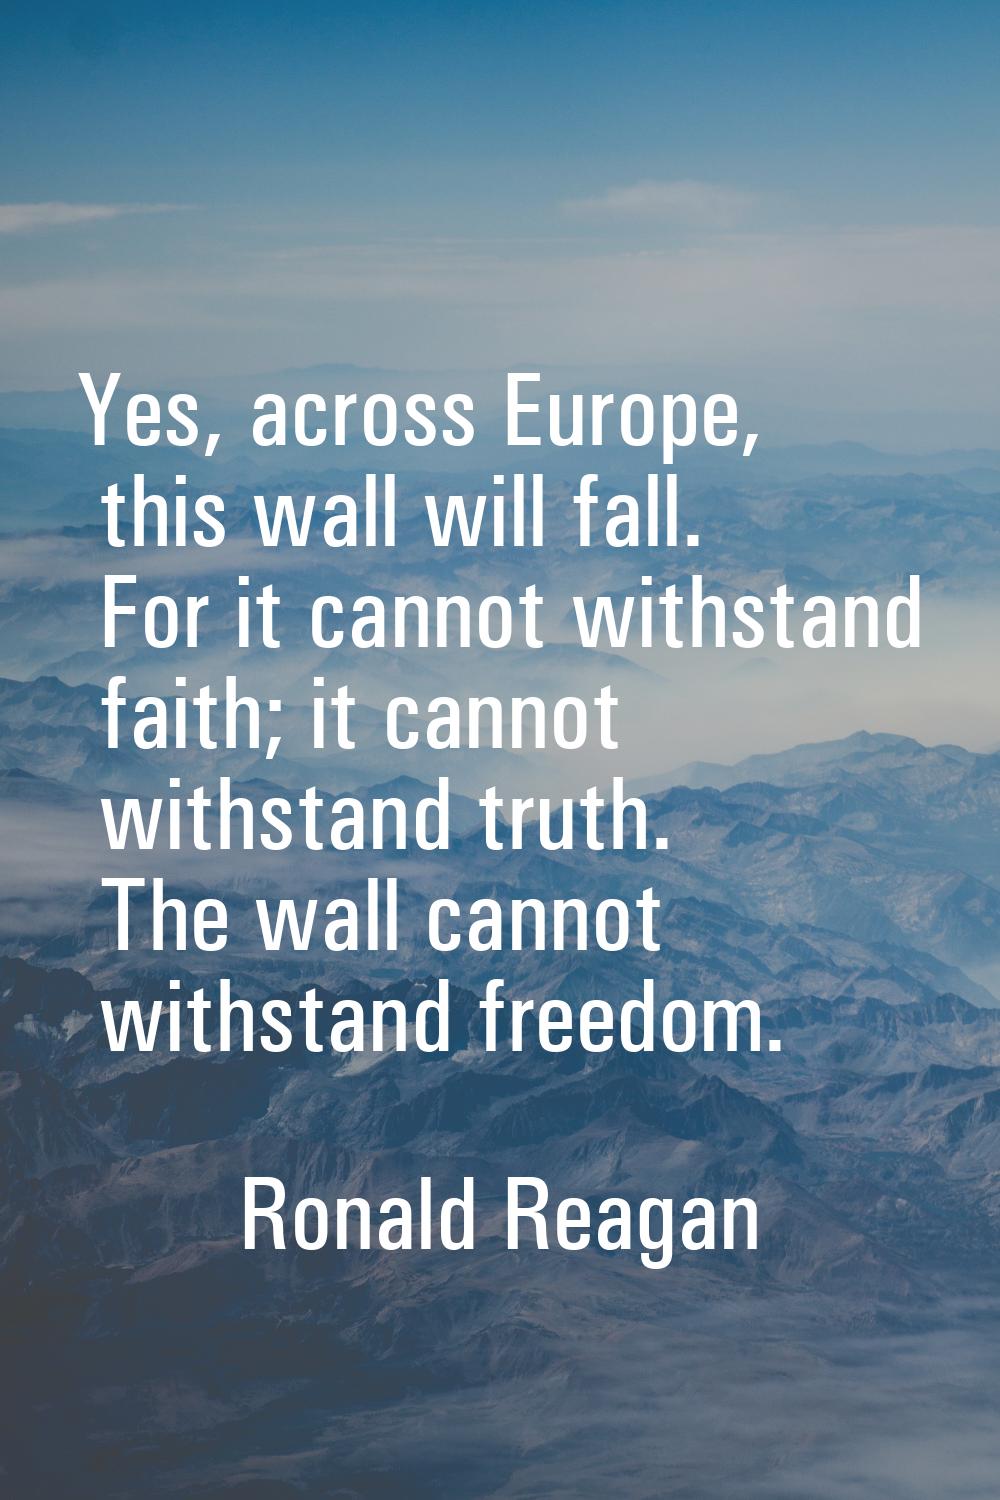 Yes, across Europe, this wall will fall. For it cannot withstand faith; it cannot withstand truth. 